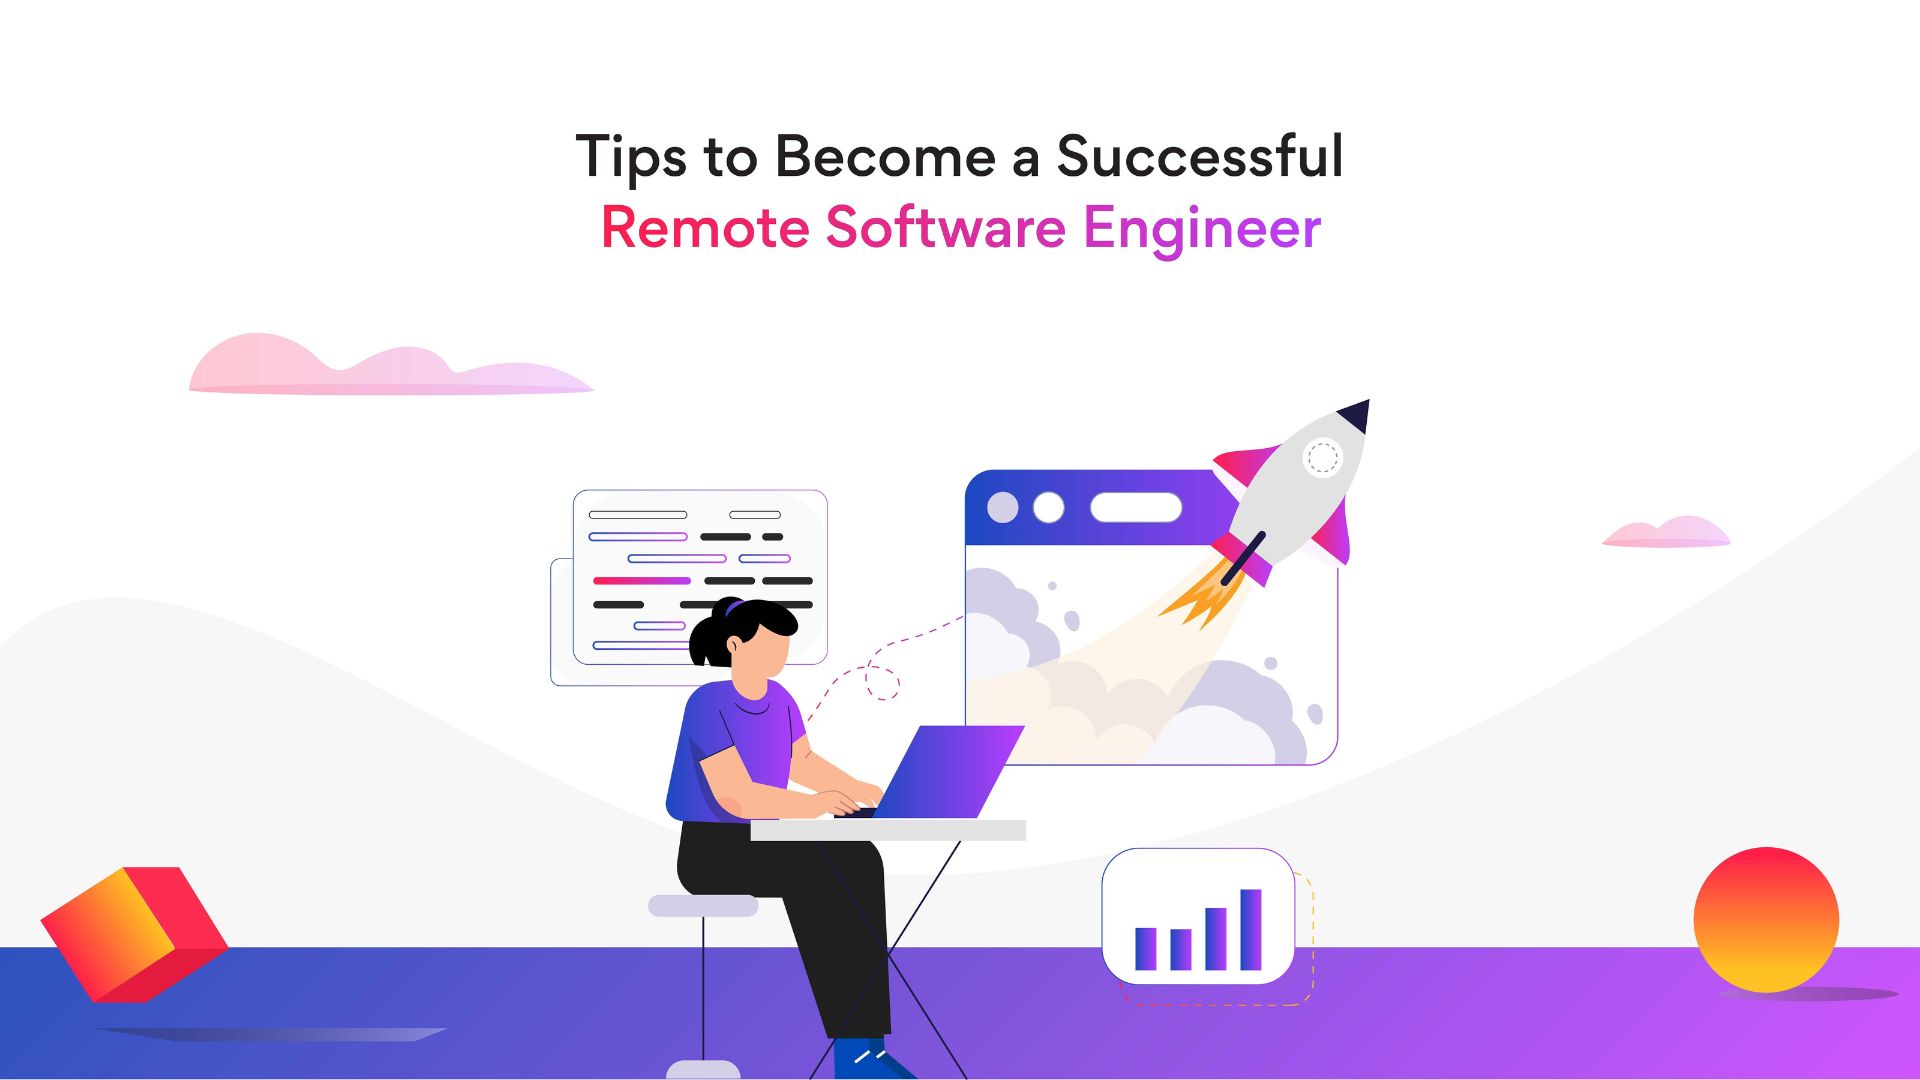 Tips to become a successful remote software engineer